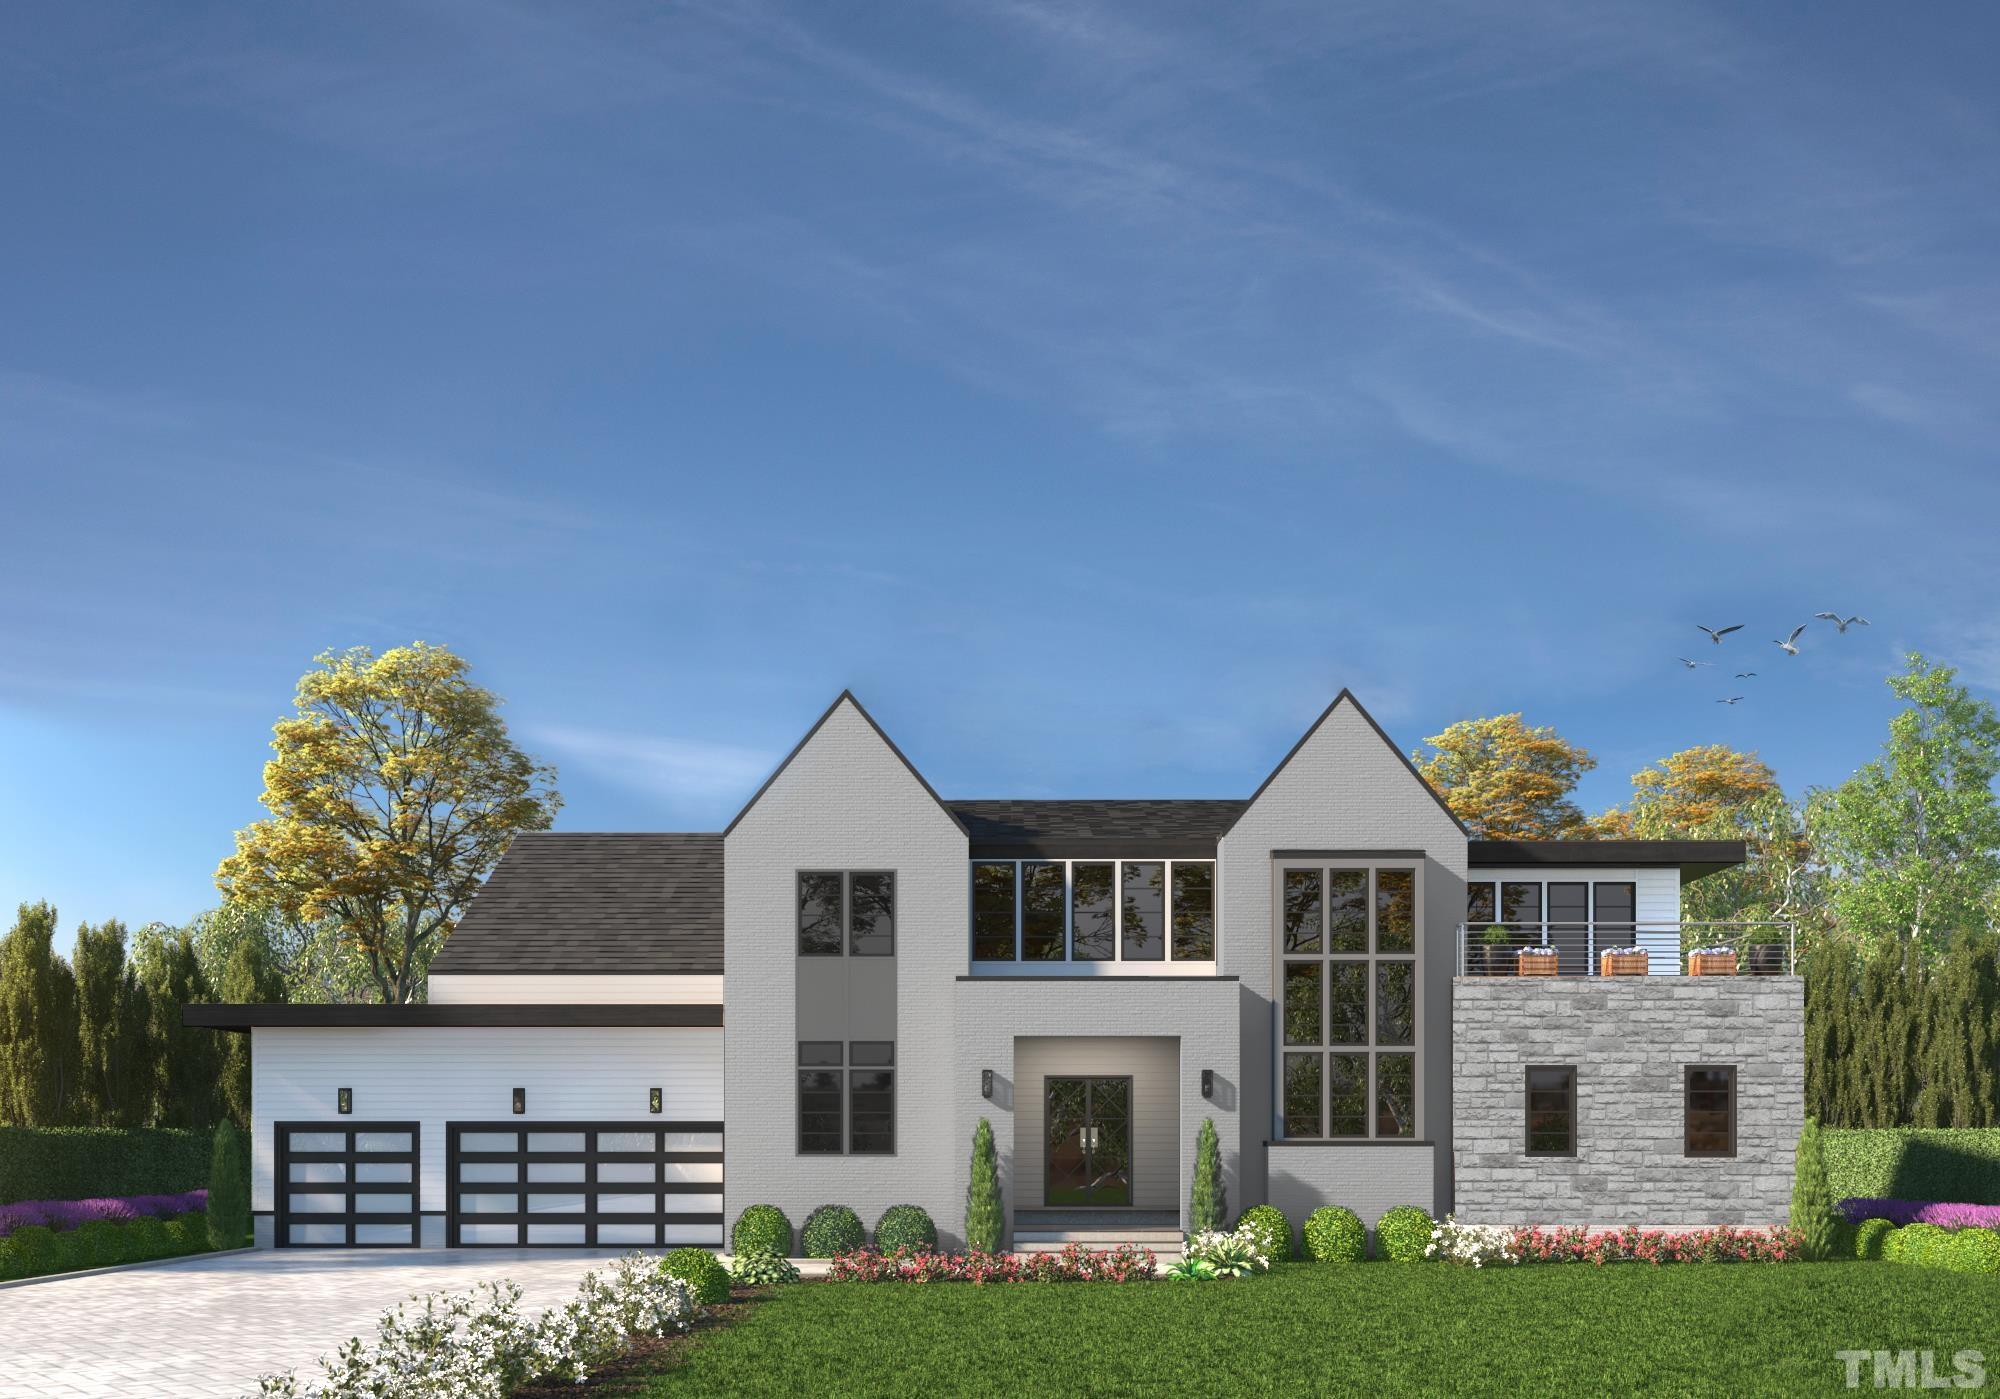 Exciting New Contemporary Design with Lots of Windows & Stone Accents